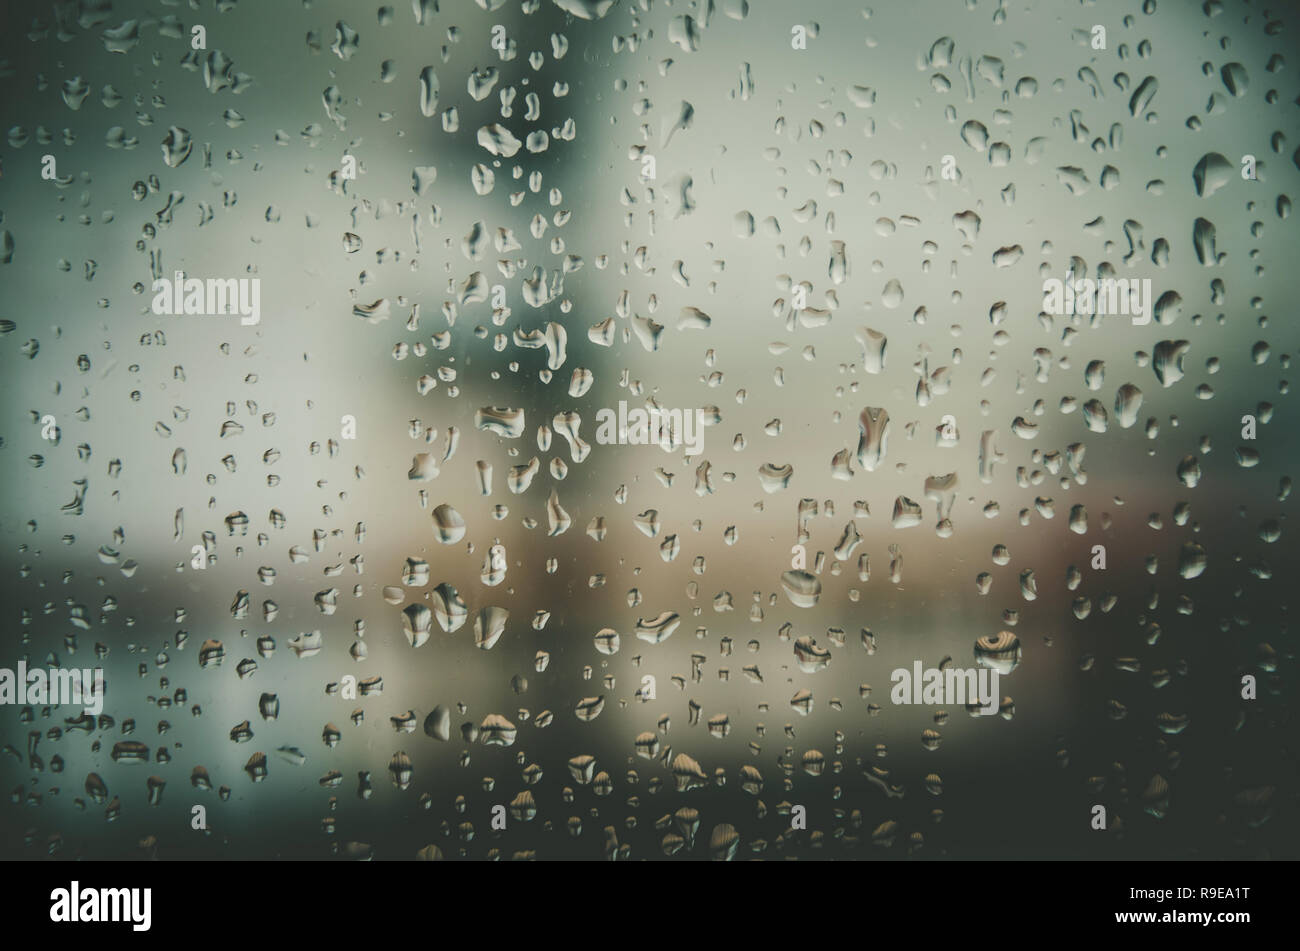 Wallpaper of rain drops or water drops on the glass, Vintage background by  rainy drop on window, Rainy day with raindrop on the glass, Texture of wate  Stock Photo - Alamy